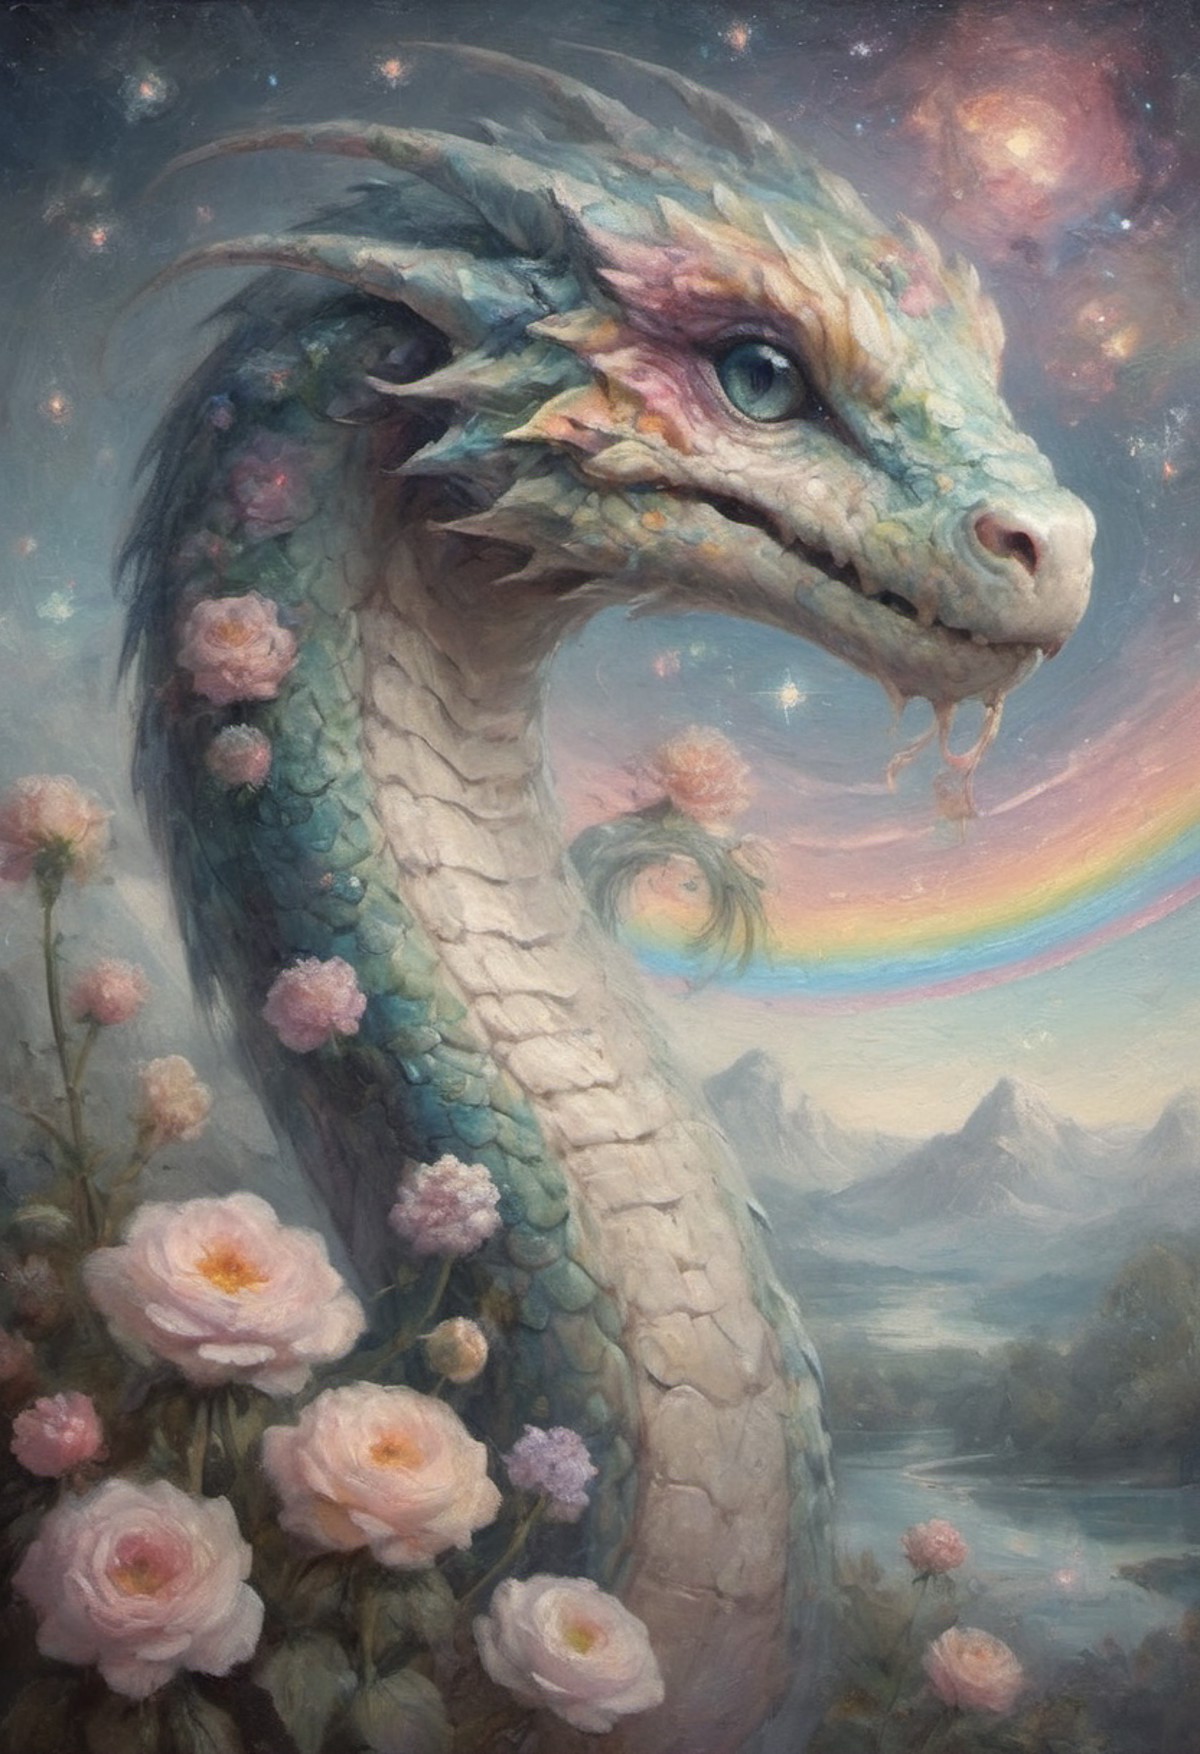 atmospheric oil painting of a hyper-real portrait of a hauntingly beautiful pale pastel rainbow scaled sky serpent with hu...